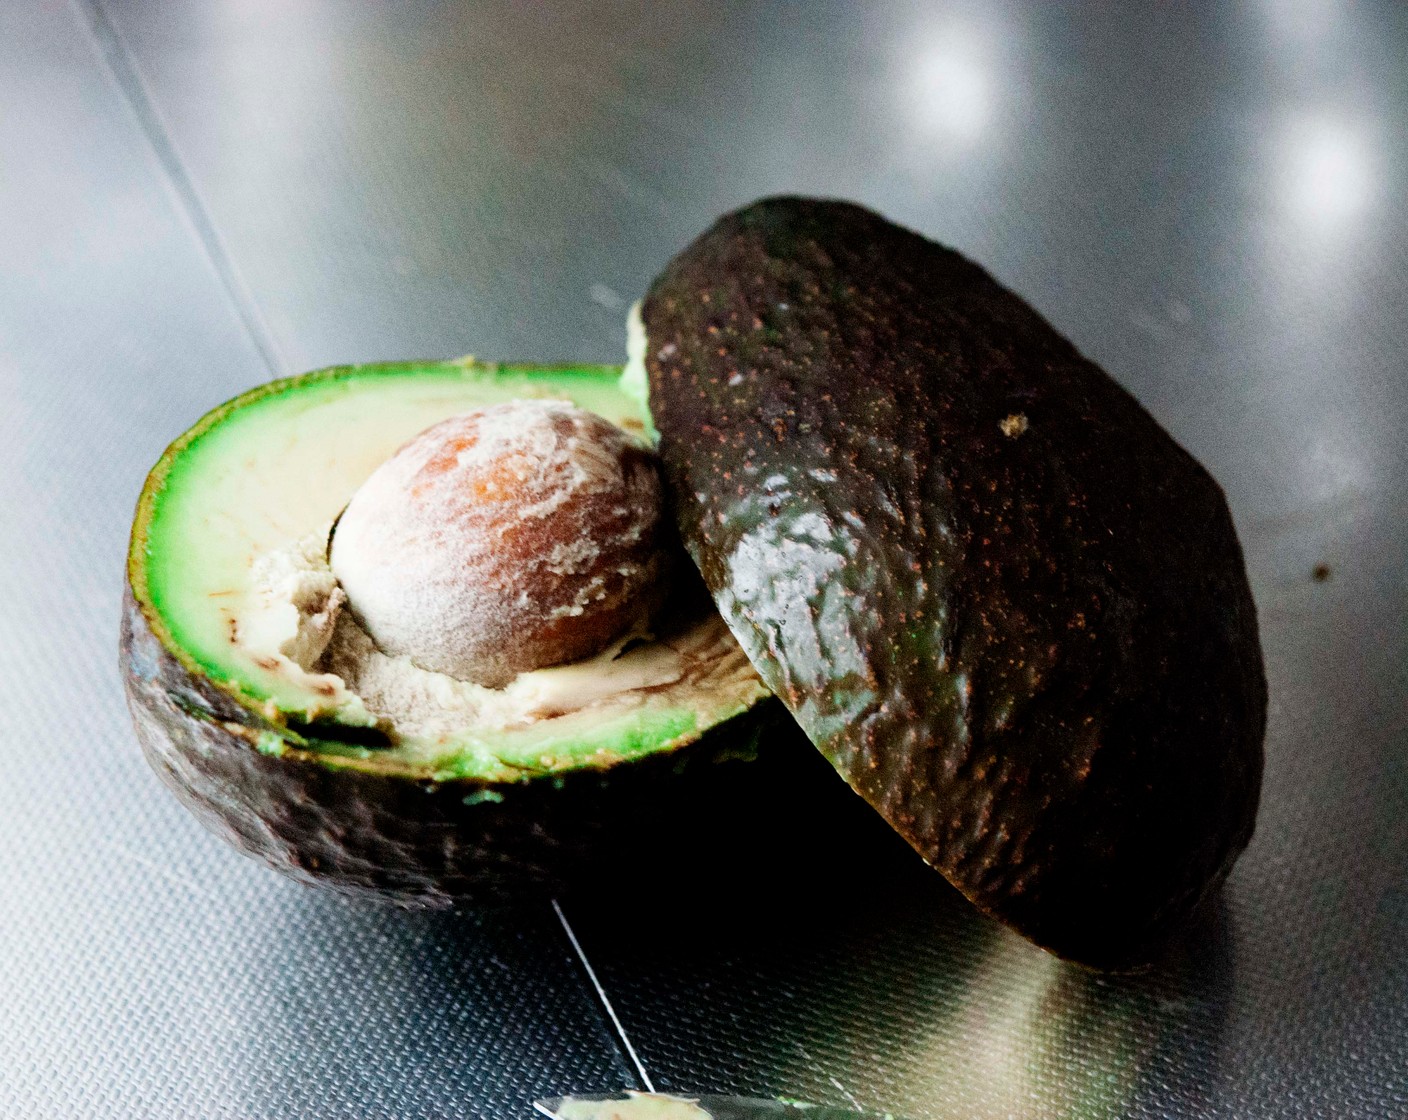 step 2 Remove the skin and central pit from the Avocado (1). Transfer it into the bowl of your electric mixer with Coconut Oil (1 Tbsp) and stir until creamy.